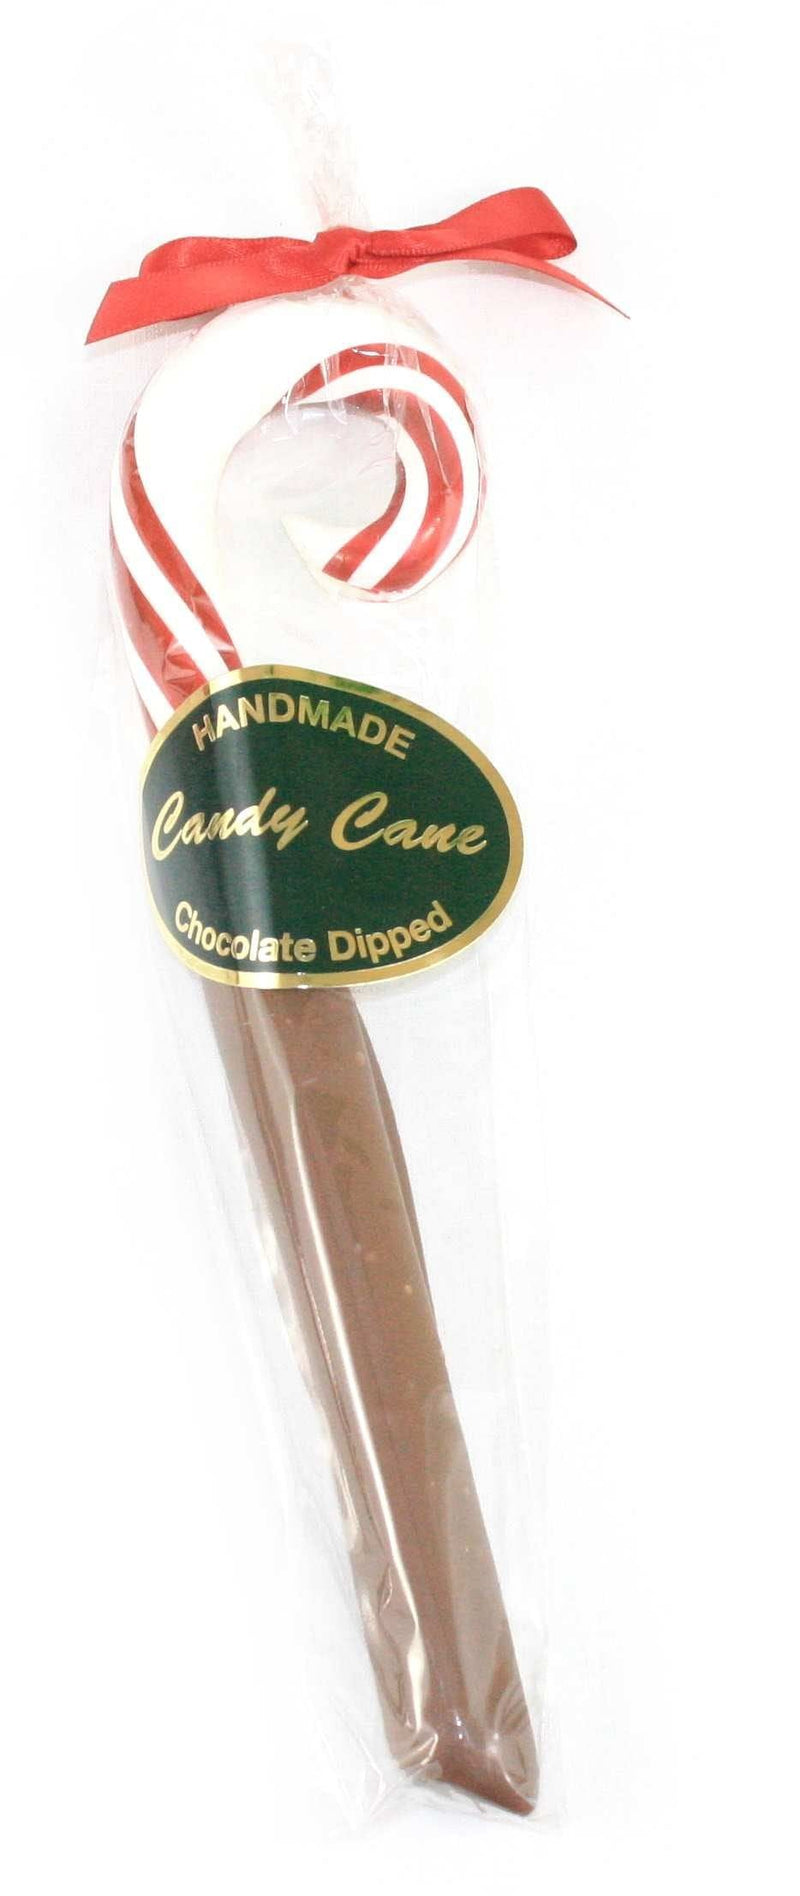 Handmade Old Fashioned Candy Cane - - Shelburne Country Store